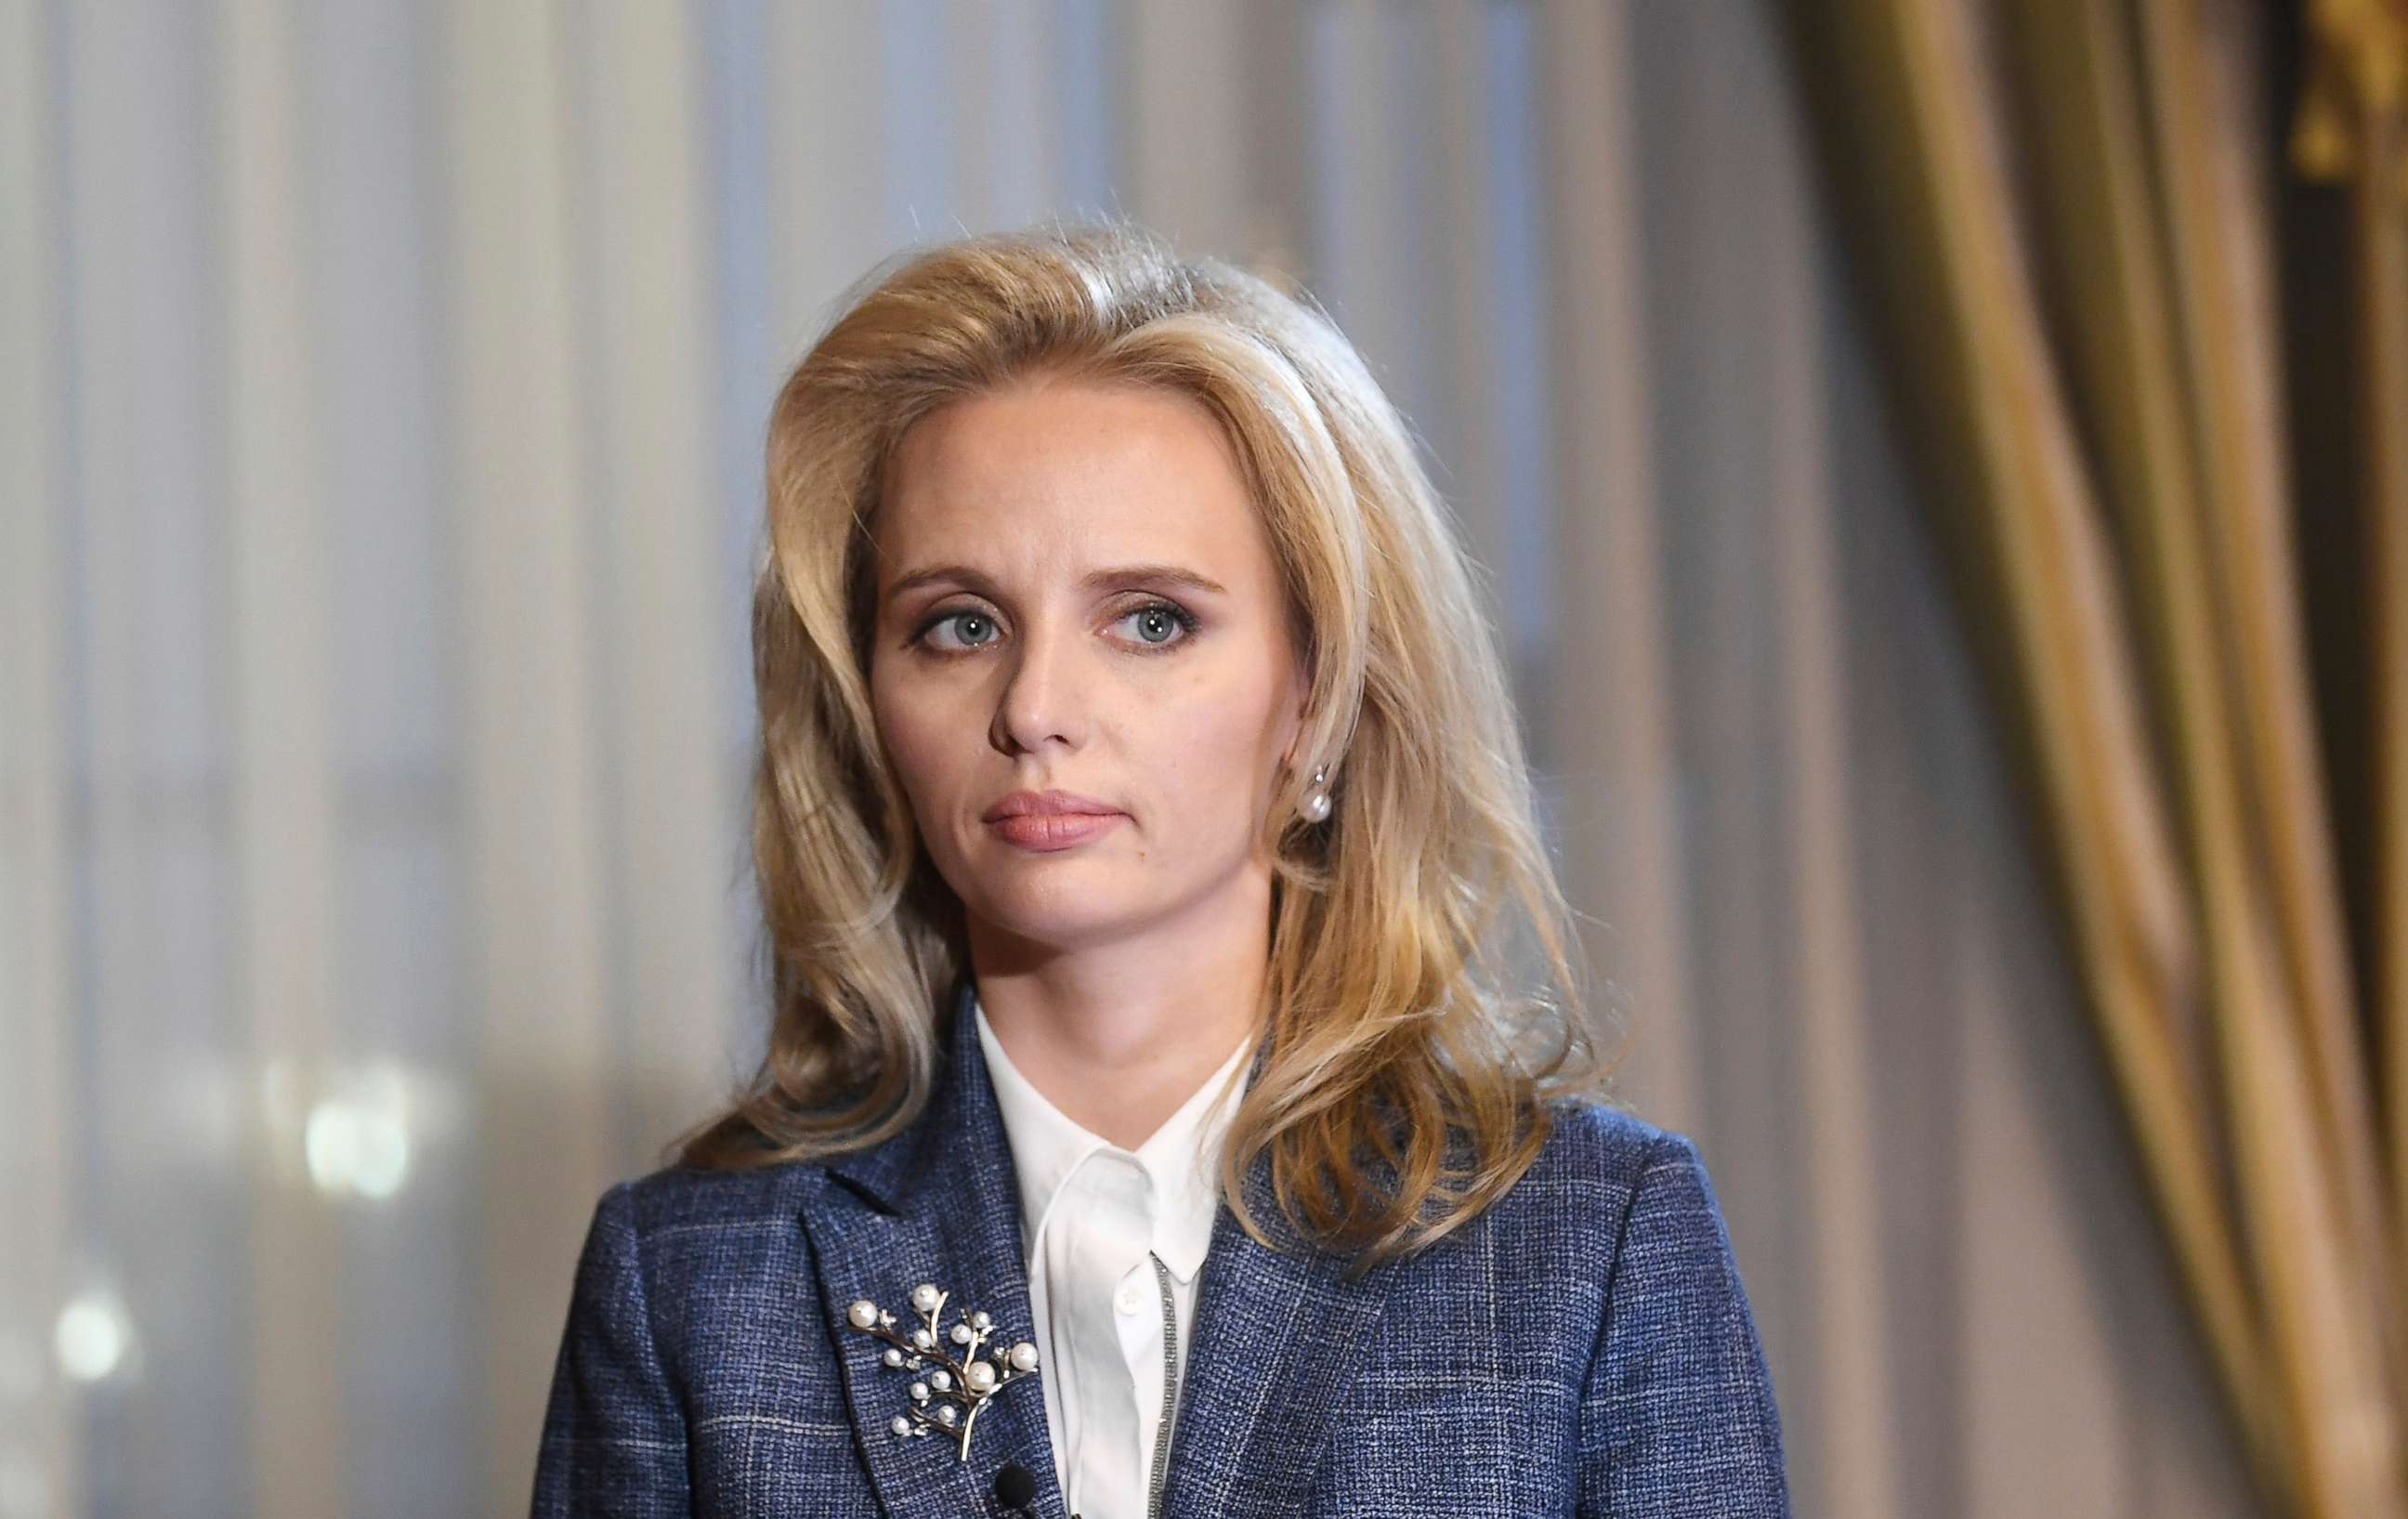 PHOTO: Leading researcher at the National Medical Research Center for Endocrinology of the Russian Health Ministry Maria Vorontsova talks at an event in St. Petersburg, Oct. 13, 2021.  Vorontsova has been referred to as Vladimir Putin's daughter.